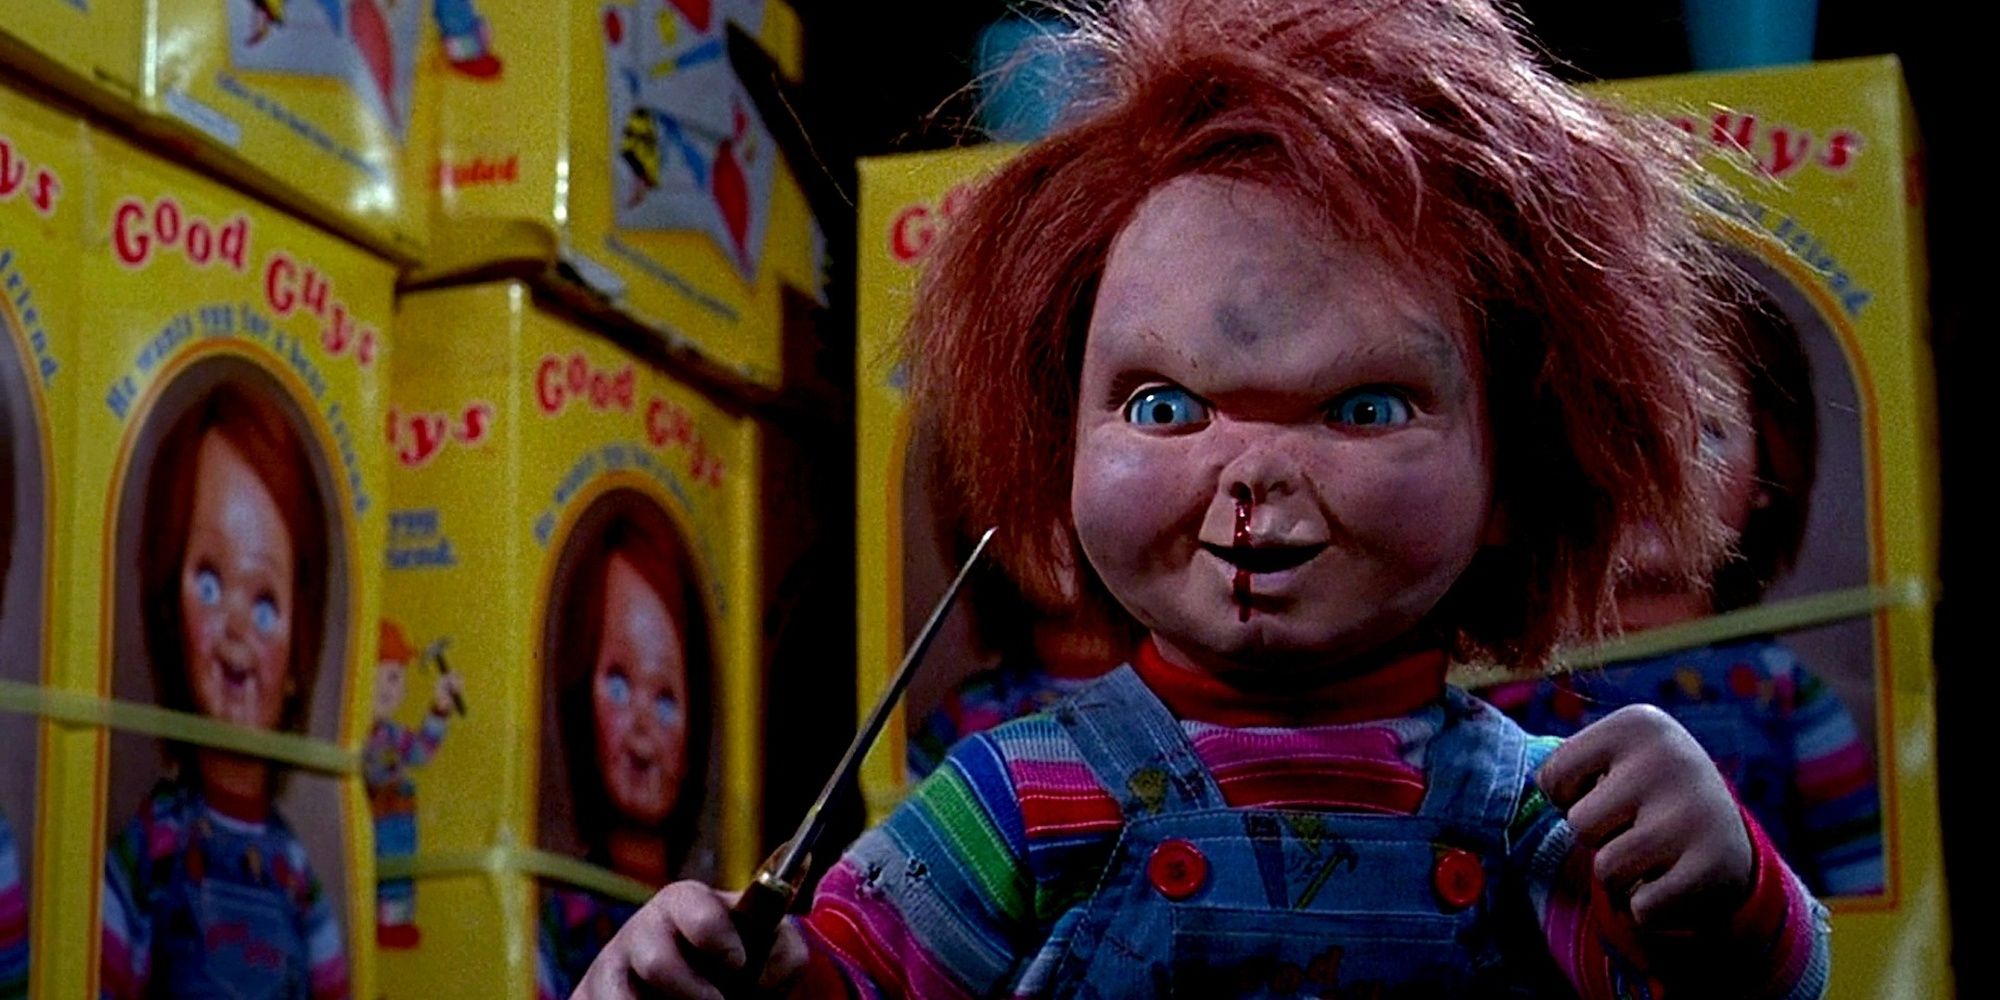 Chucky wielding a knife in Childs Play 2